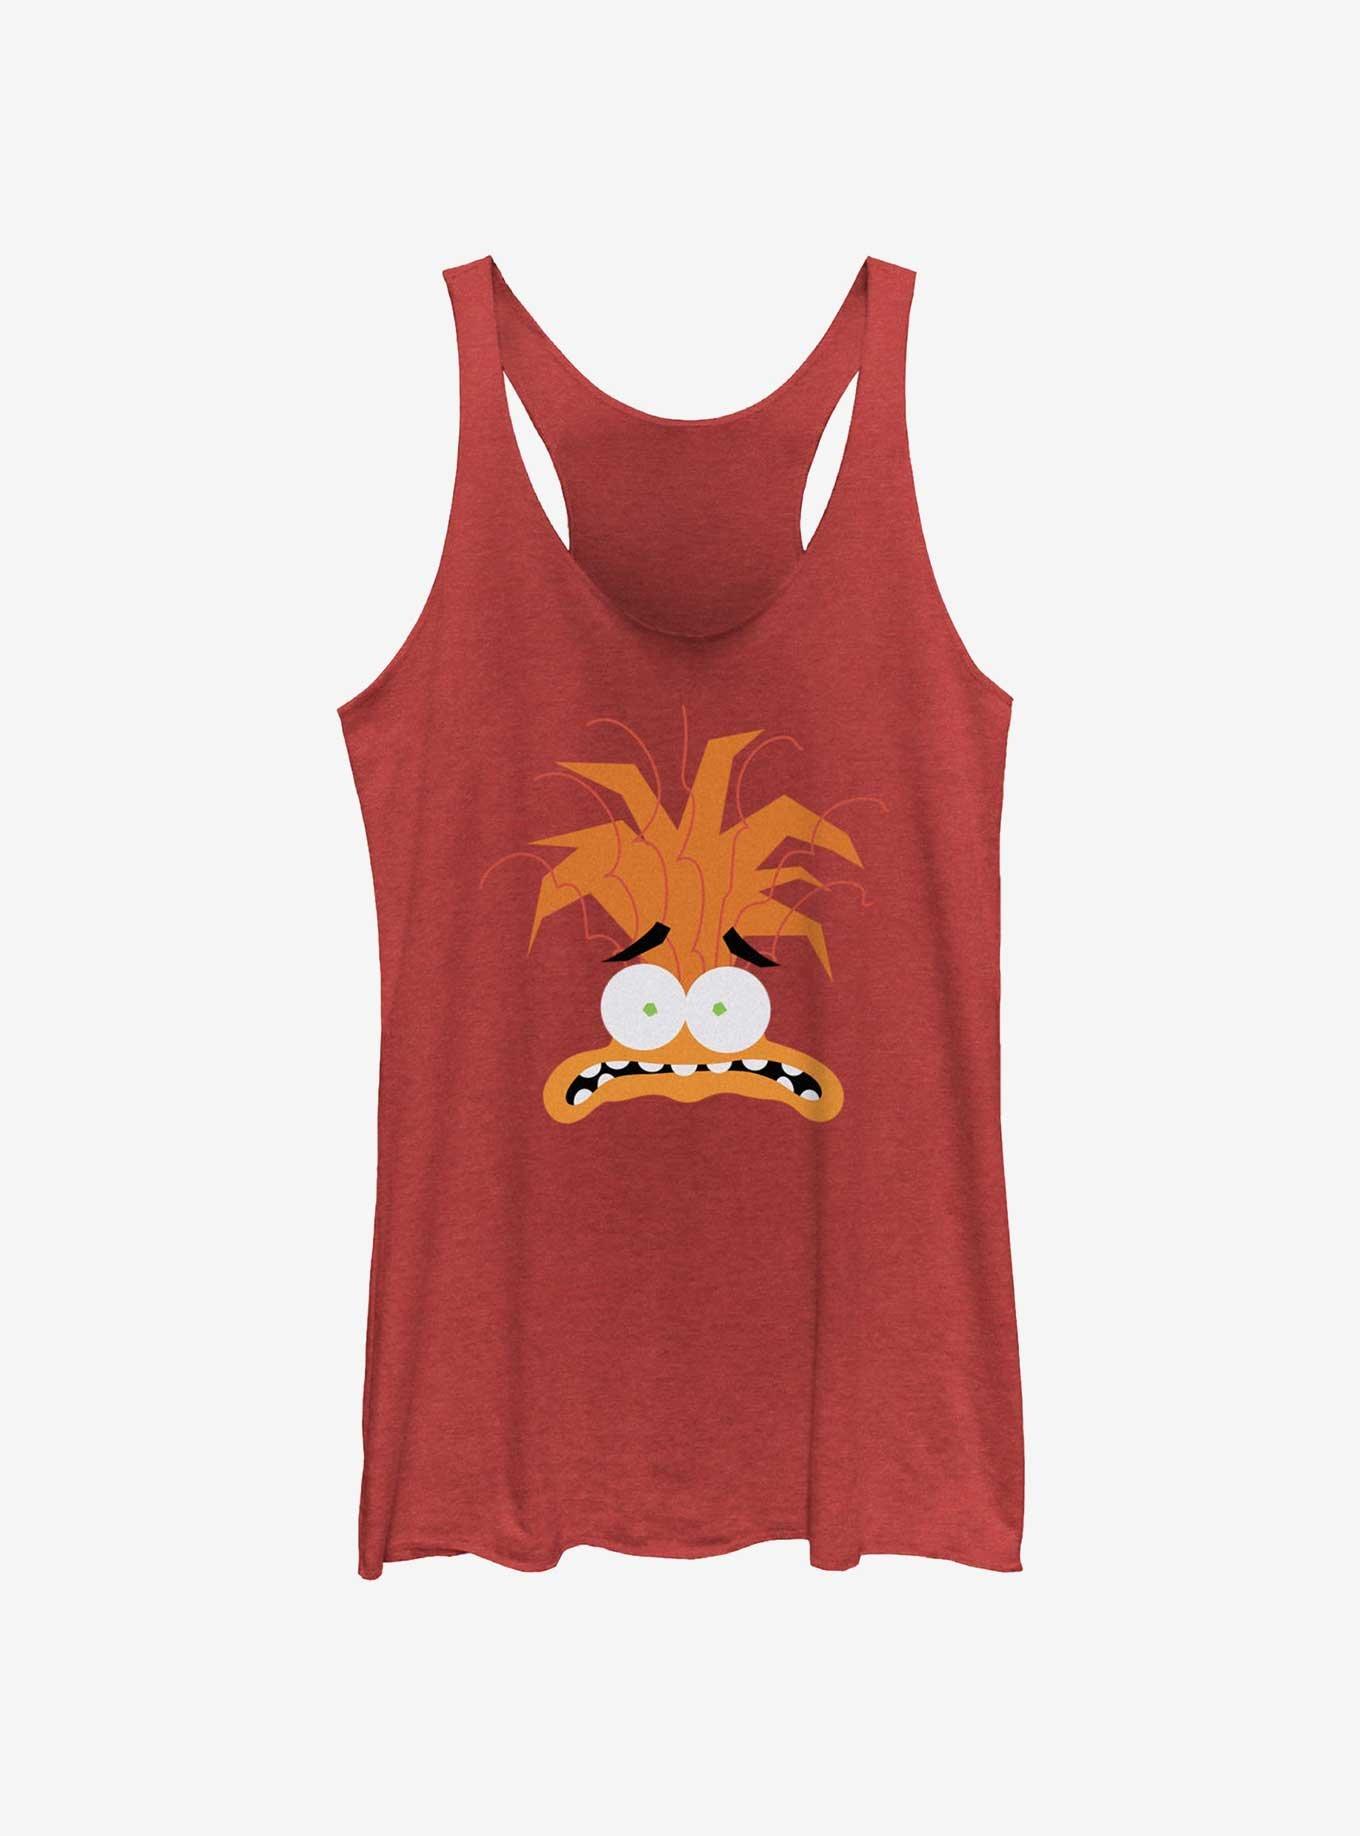 Disney Pixar Inside Out 2 Anxiety Head Girls Tank, RED HTR, hi-res